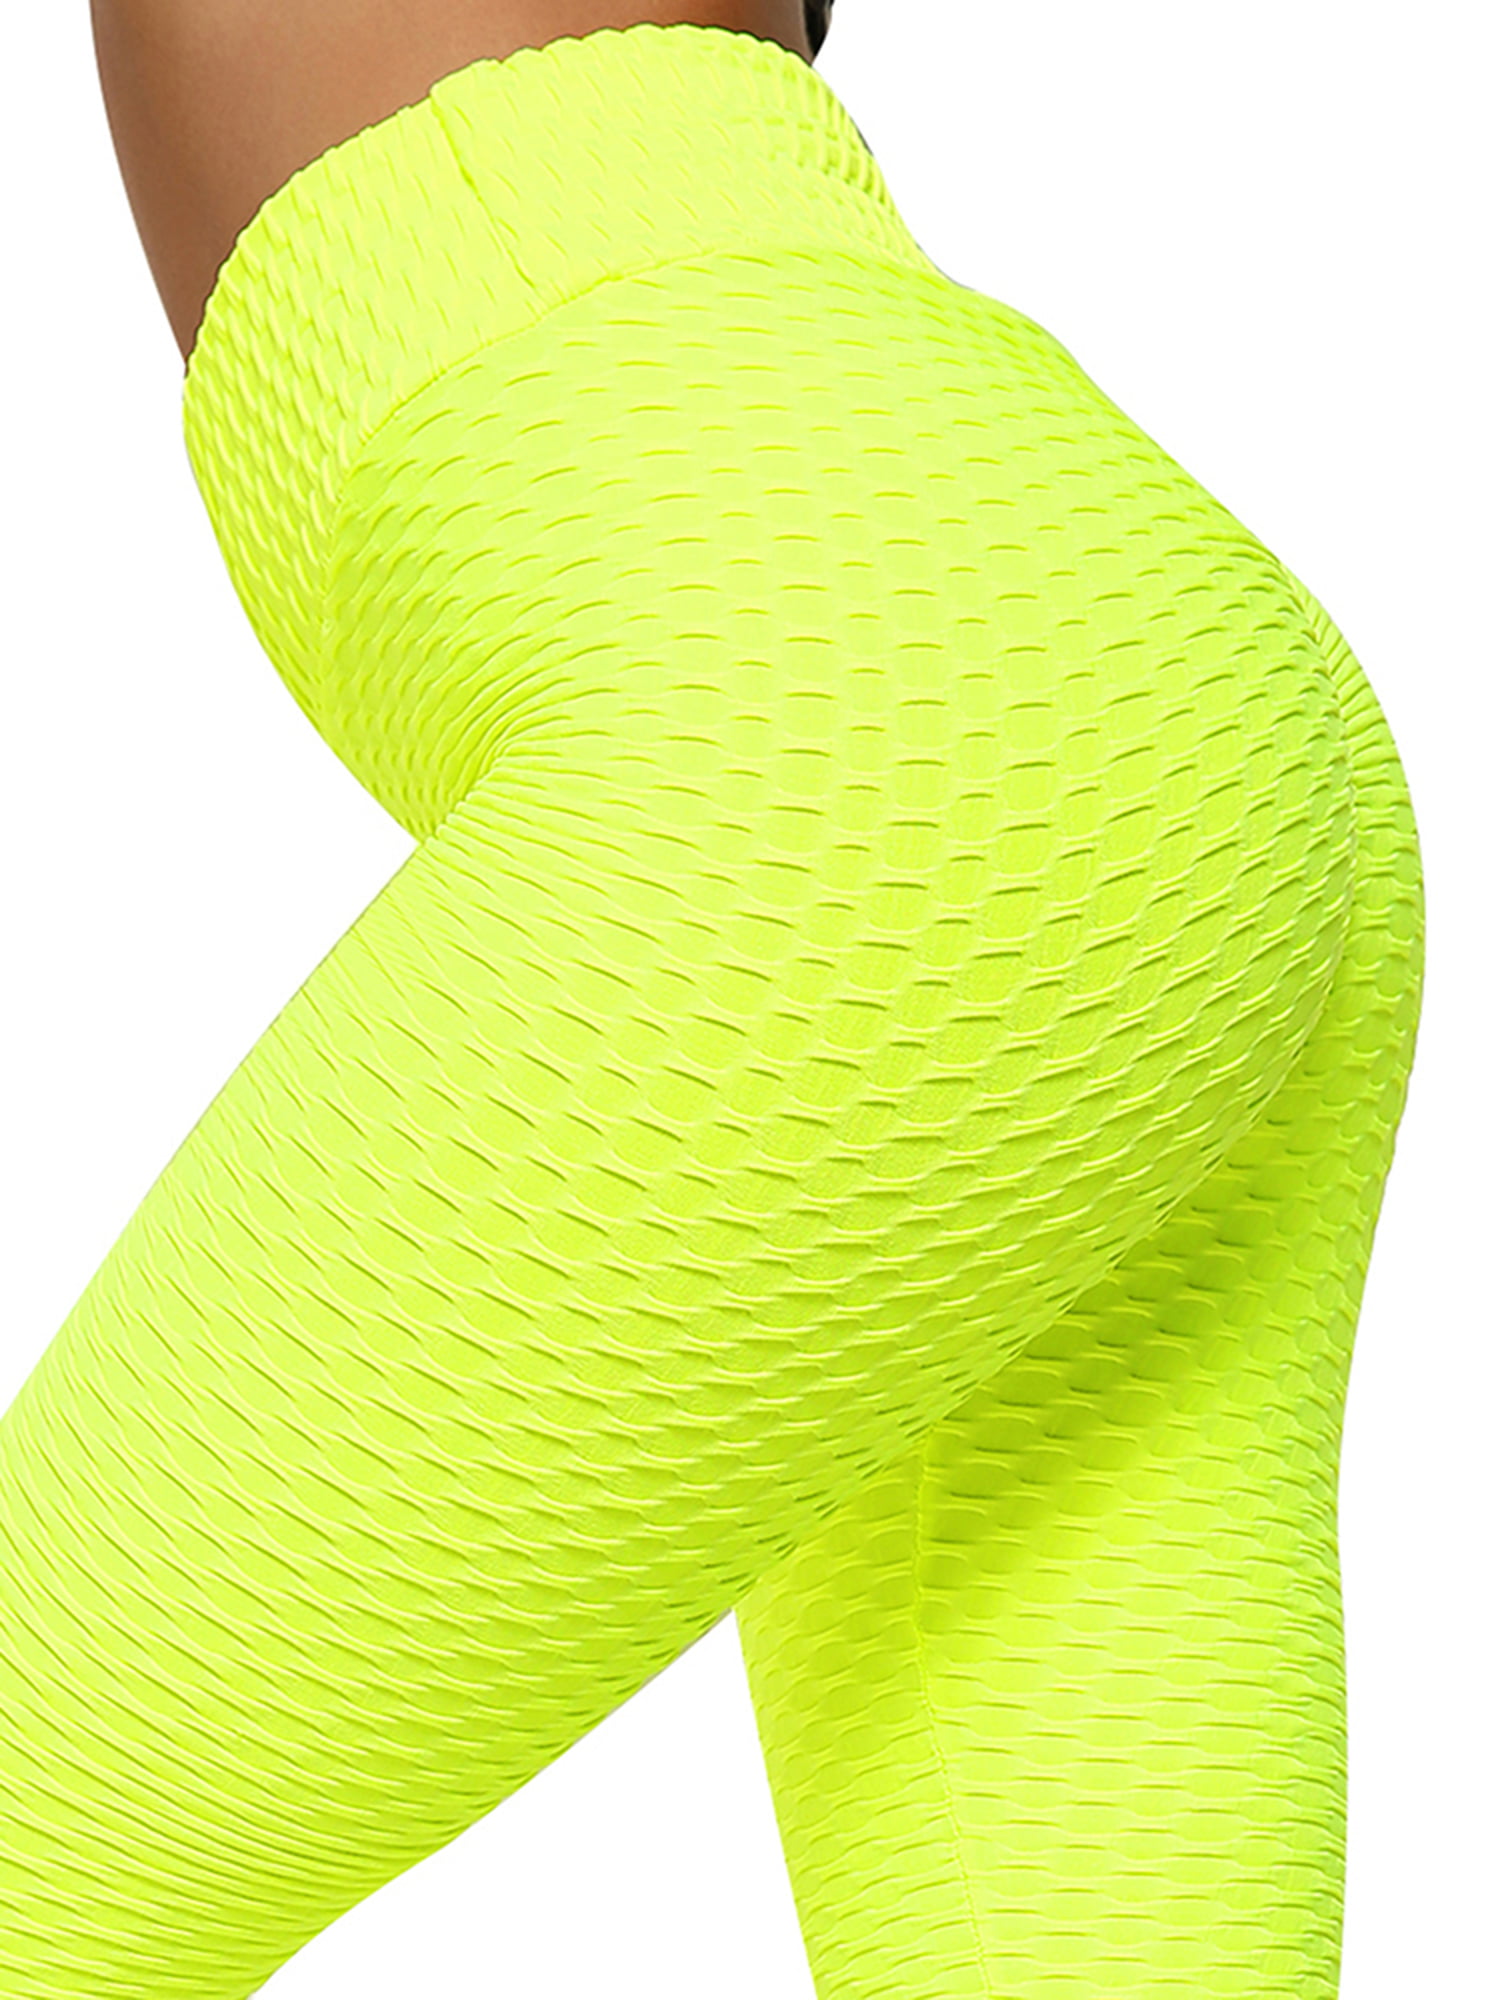 Womens Booty Yoga Pantshigh Waisted Ruched Butt Lift Textured Scrunch Tummy Control Slimming